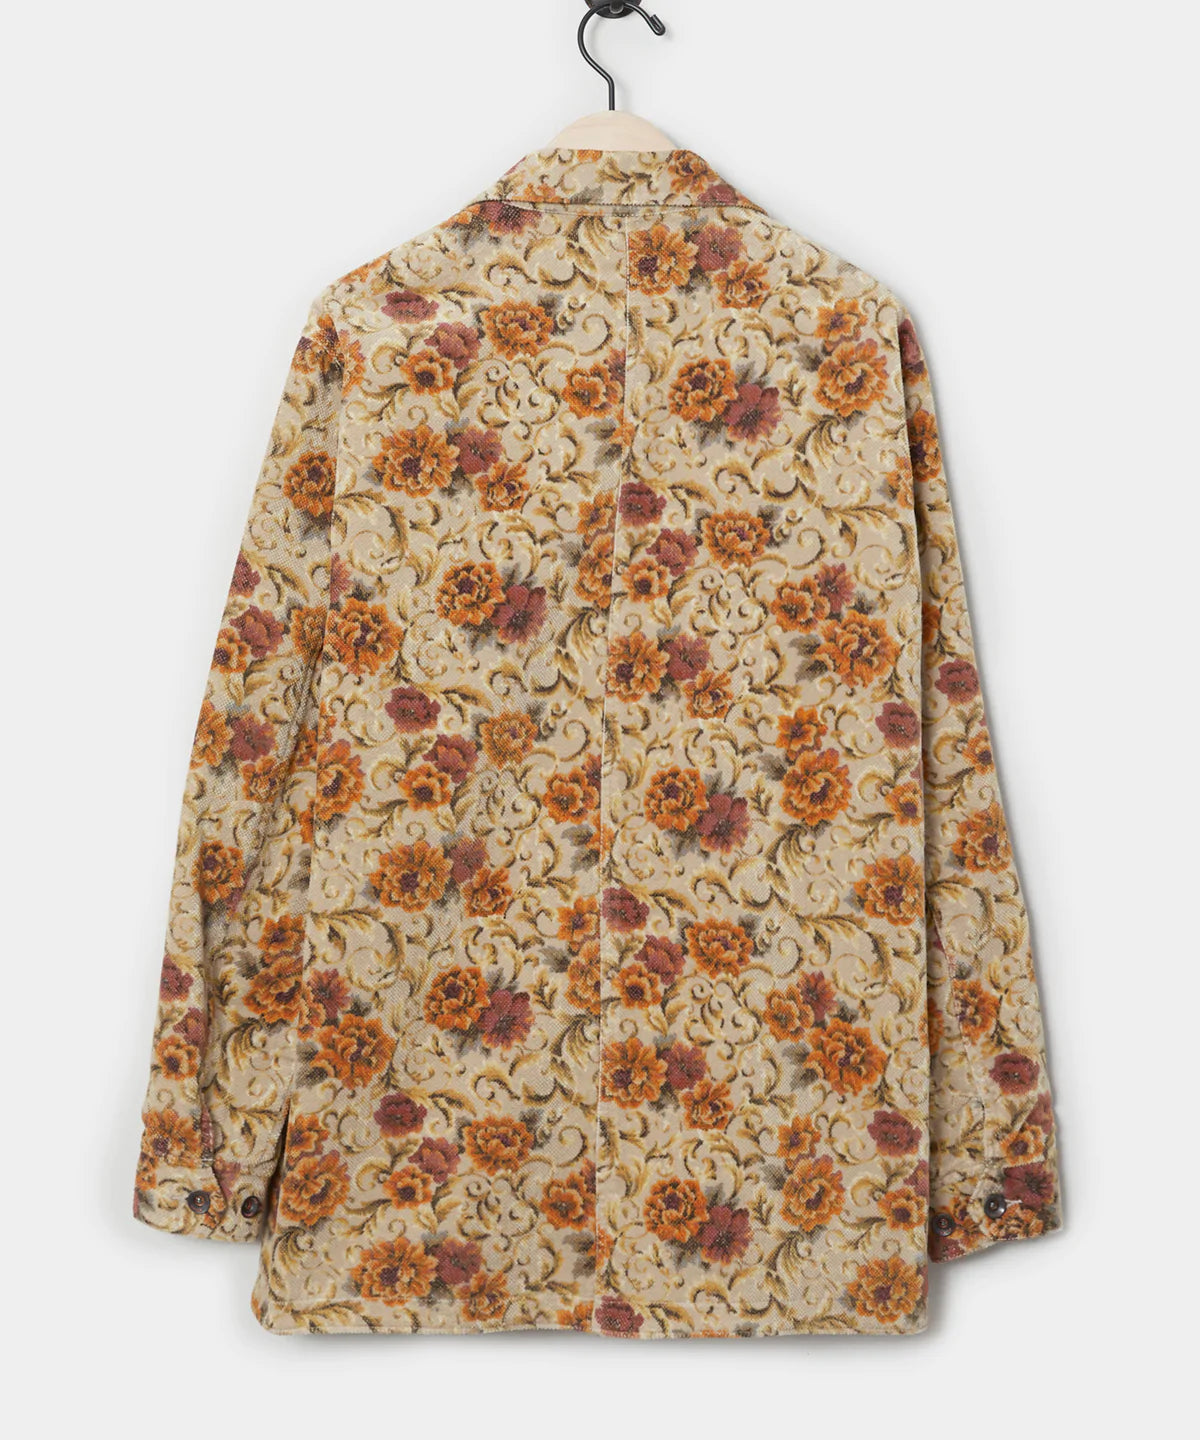 Todd Snyder - TODD SNYDER JAPANESE CORDUROY BARN JACKET IN CREAM FLORAL - Rent With Thred